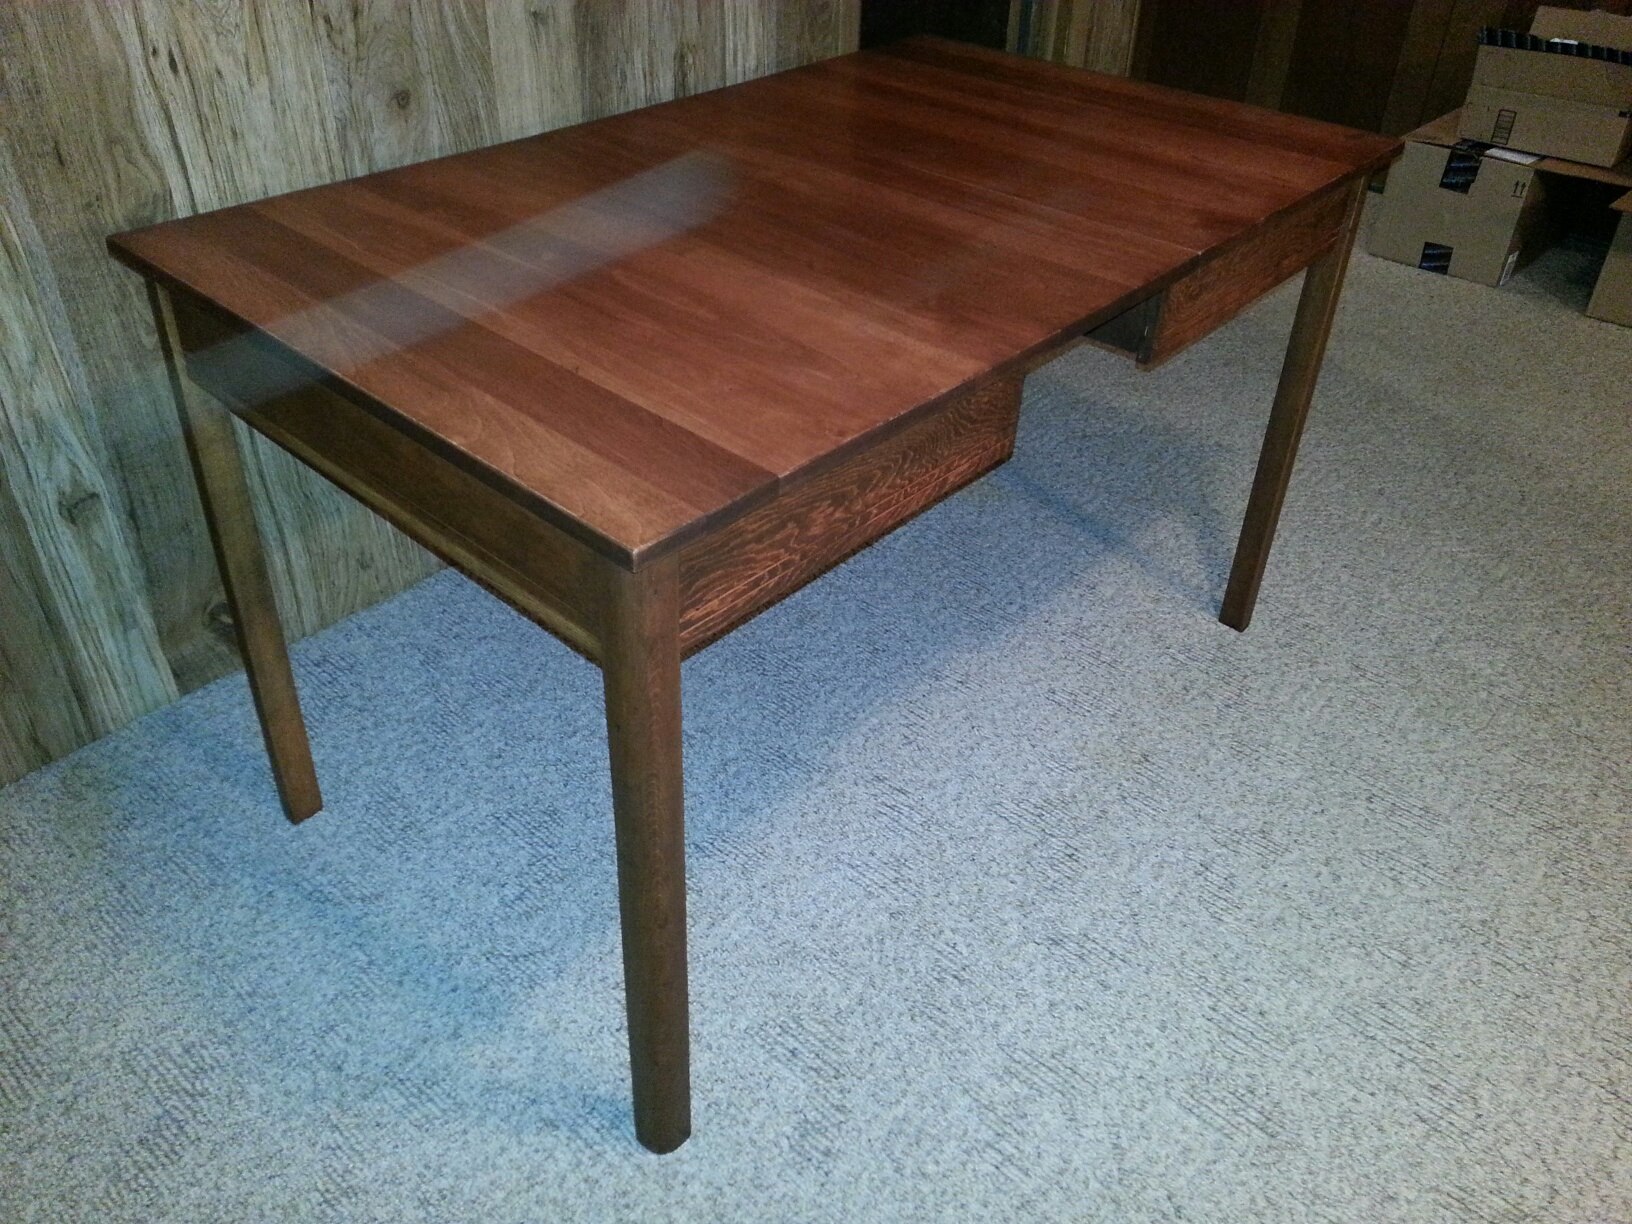 kitchen table refinished. new solid birch top stripped and refinished legs and apron to match.jpg